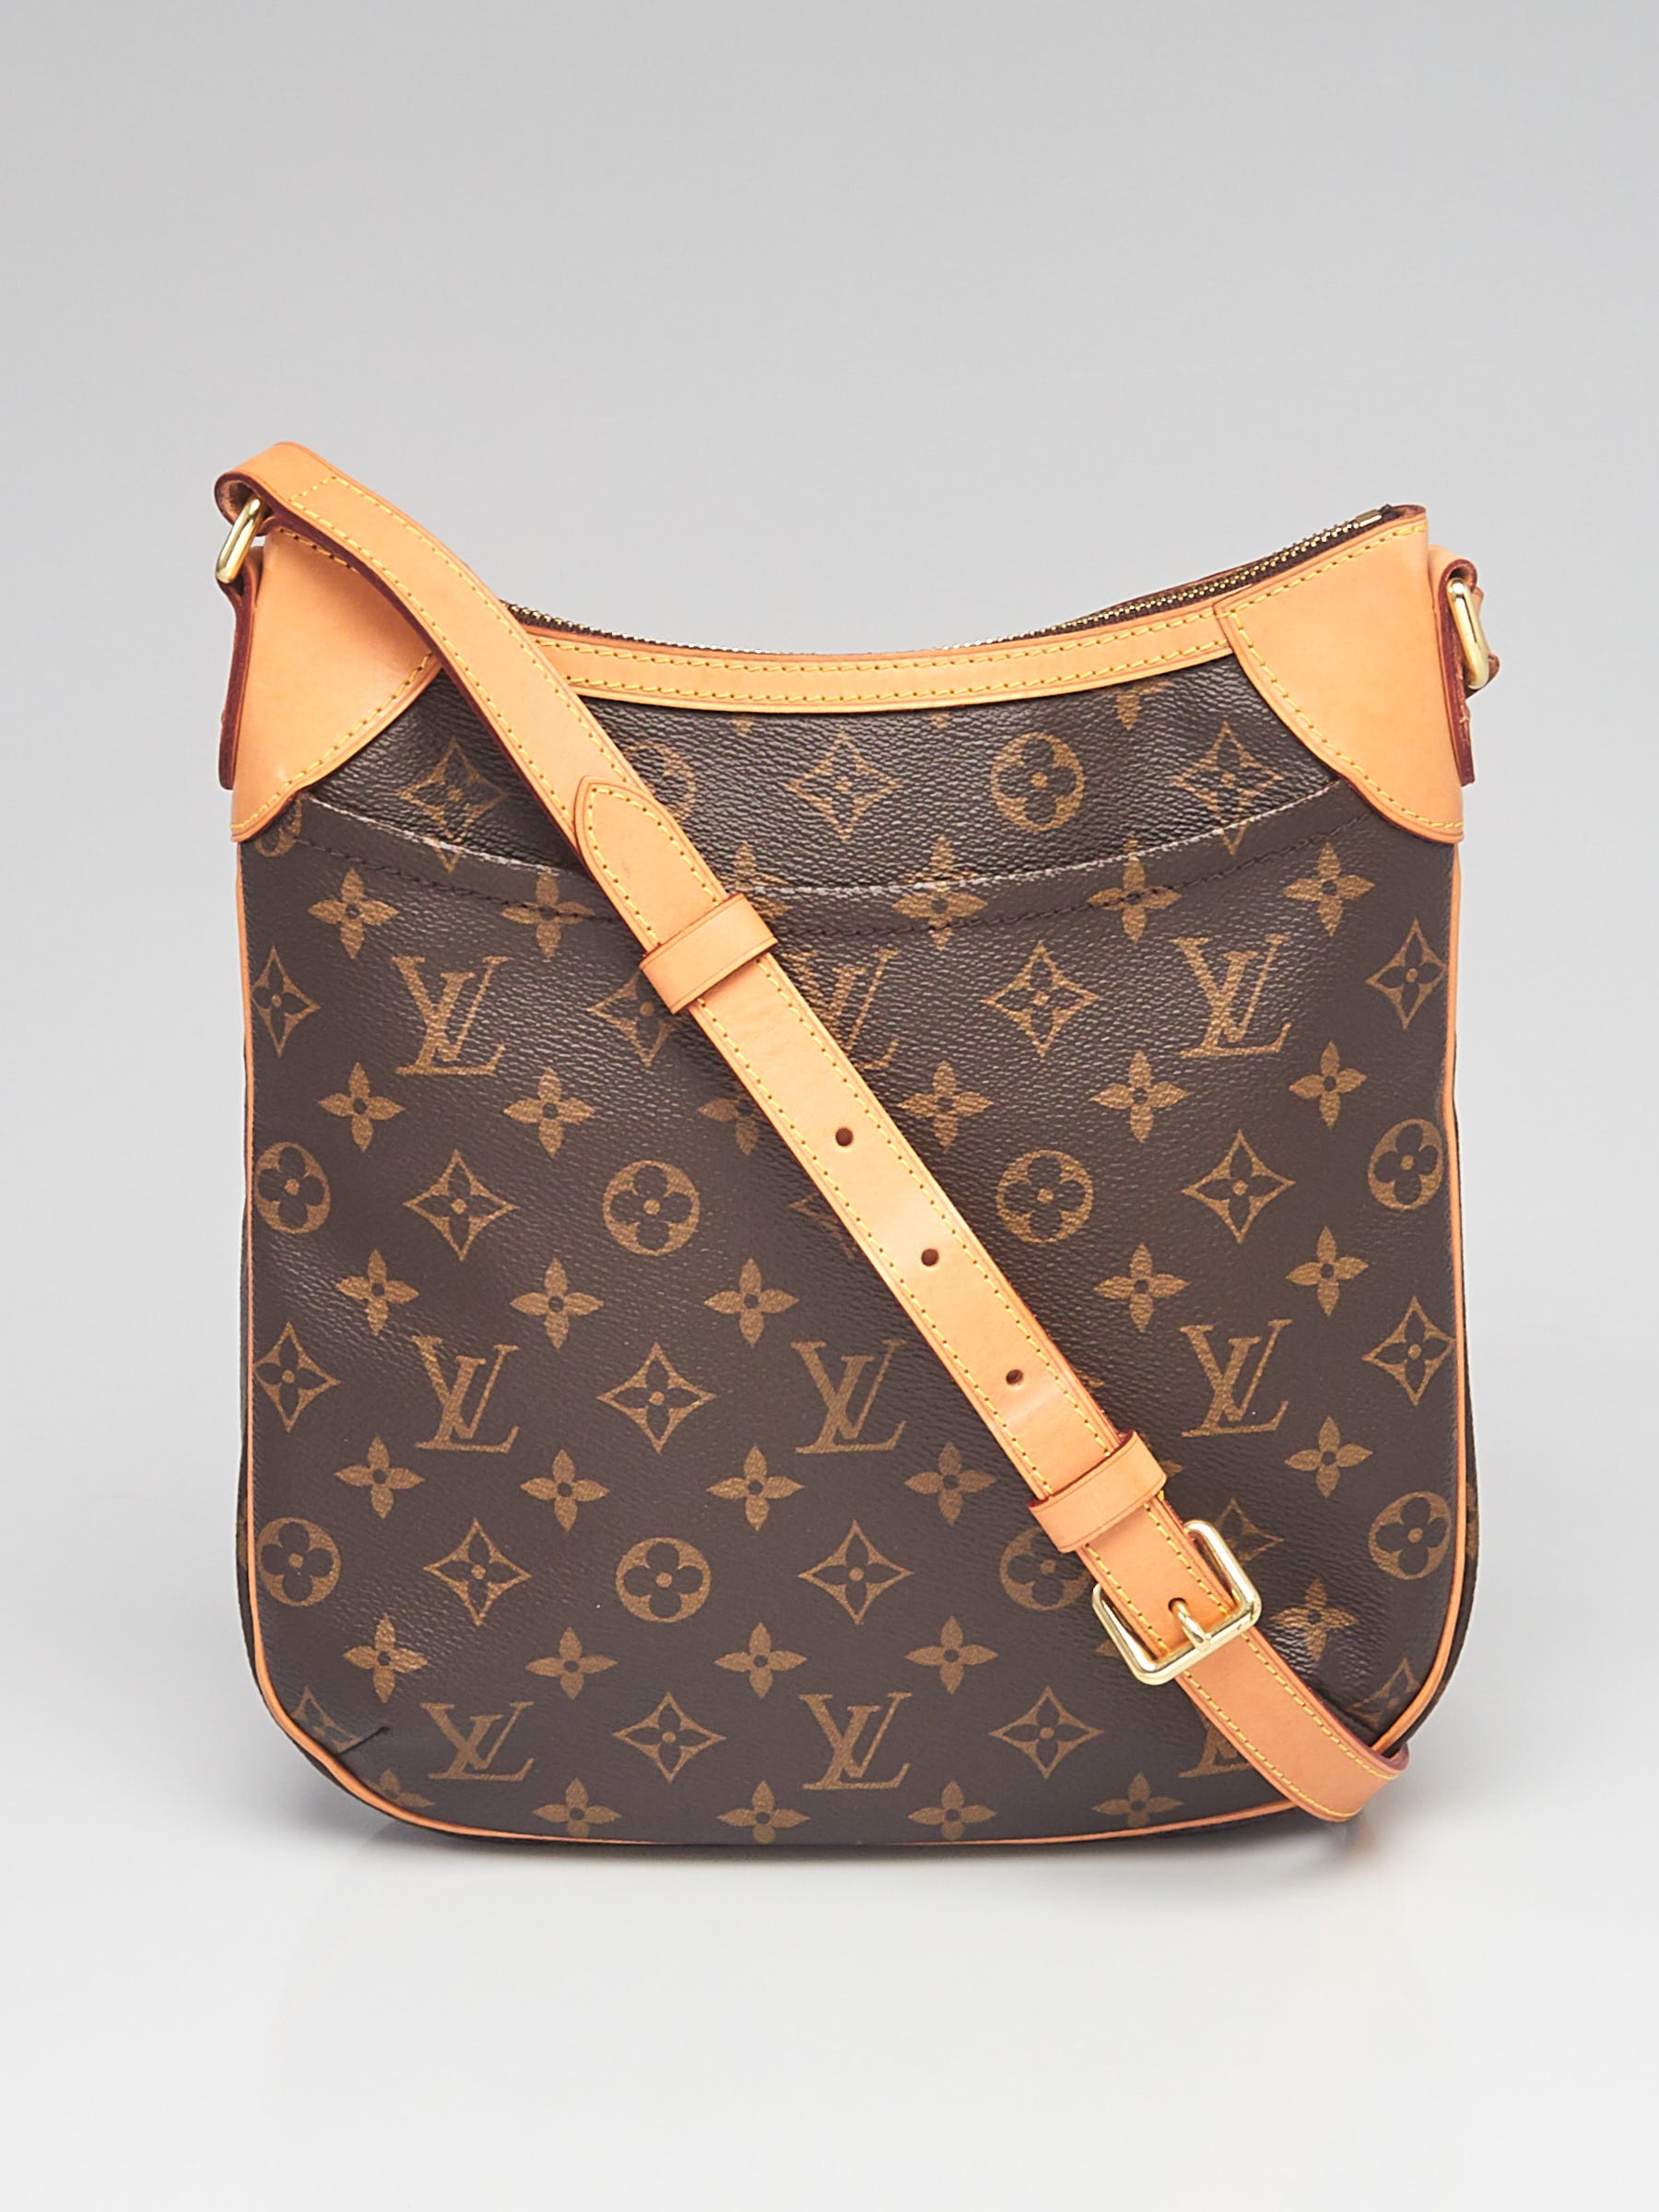 Louis Vuitton, Bags, Brand New Lv Odeon Tote Pm